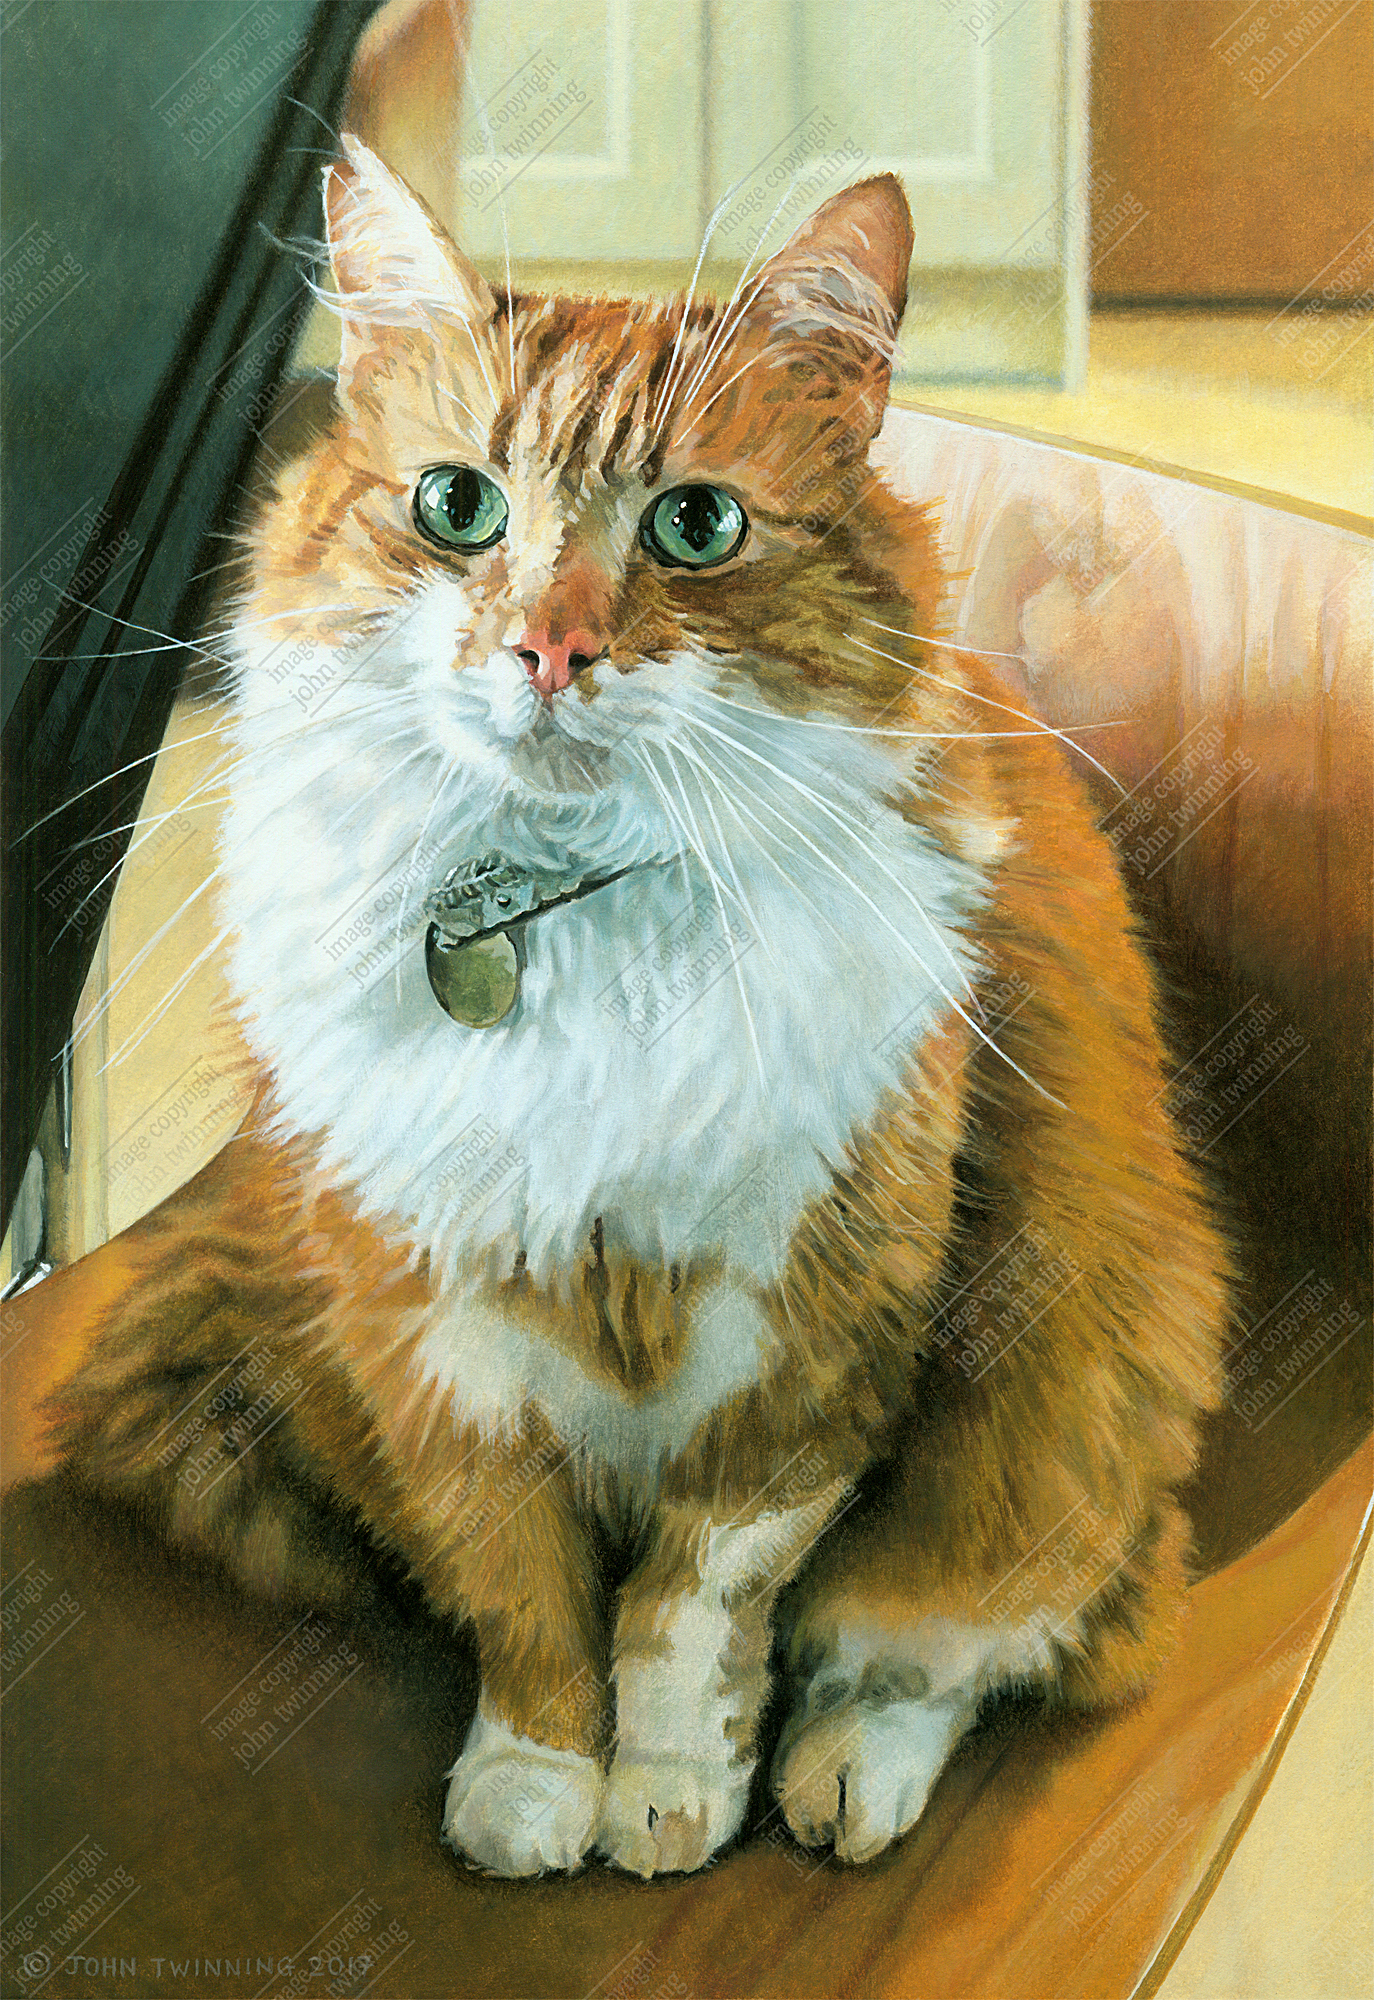 ‘Irvine Ginger’ – art print from a pet portrait watercolour painting of an orange tabby cat